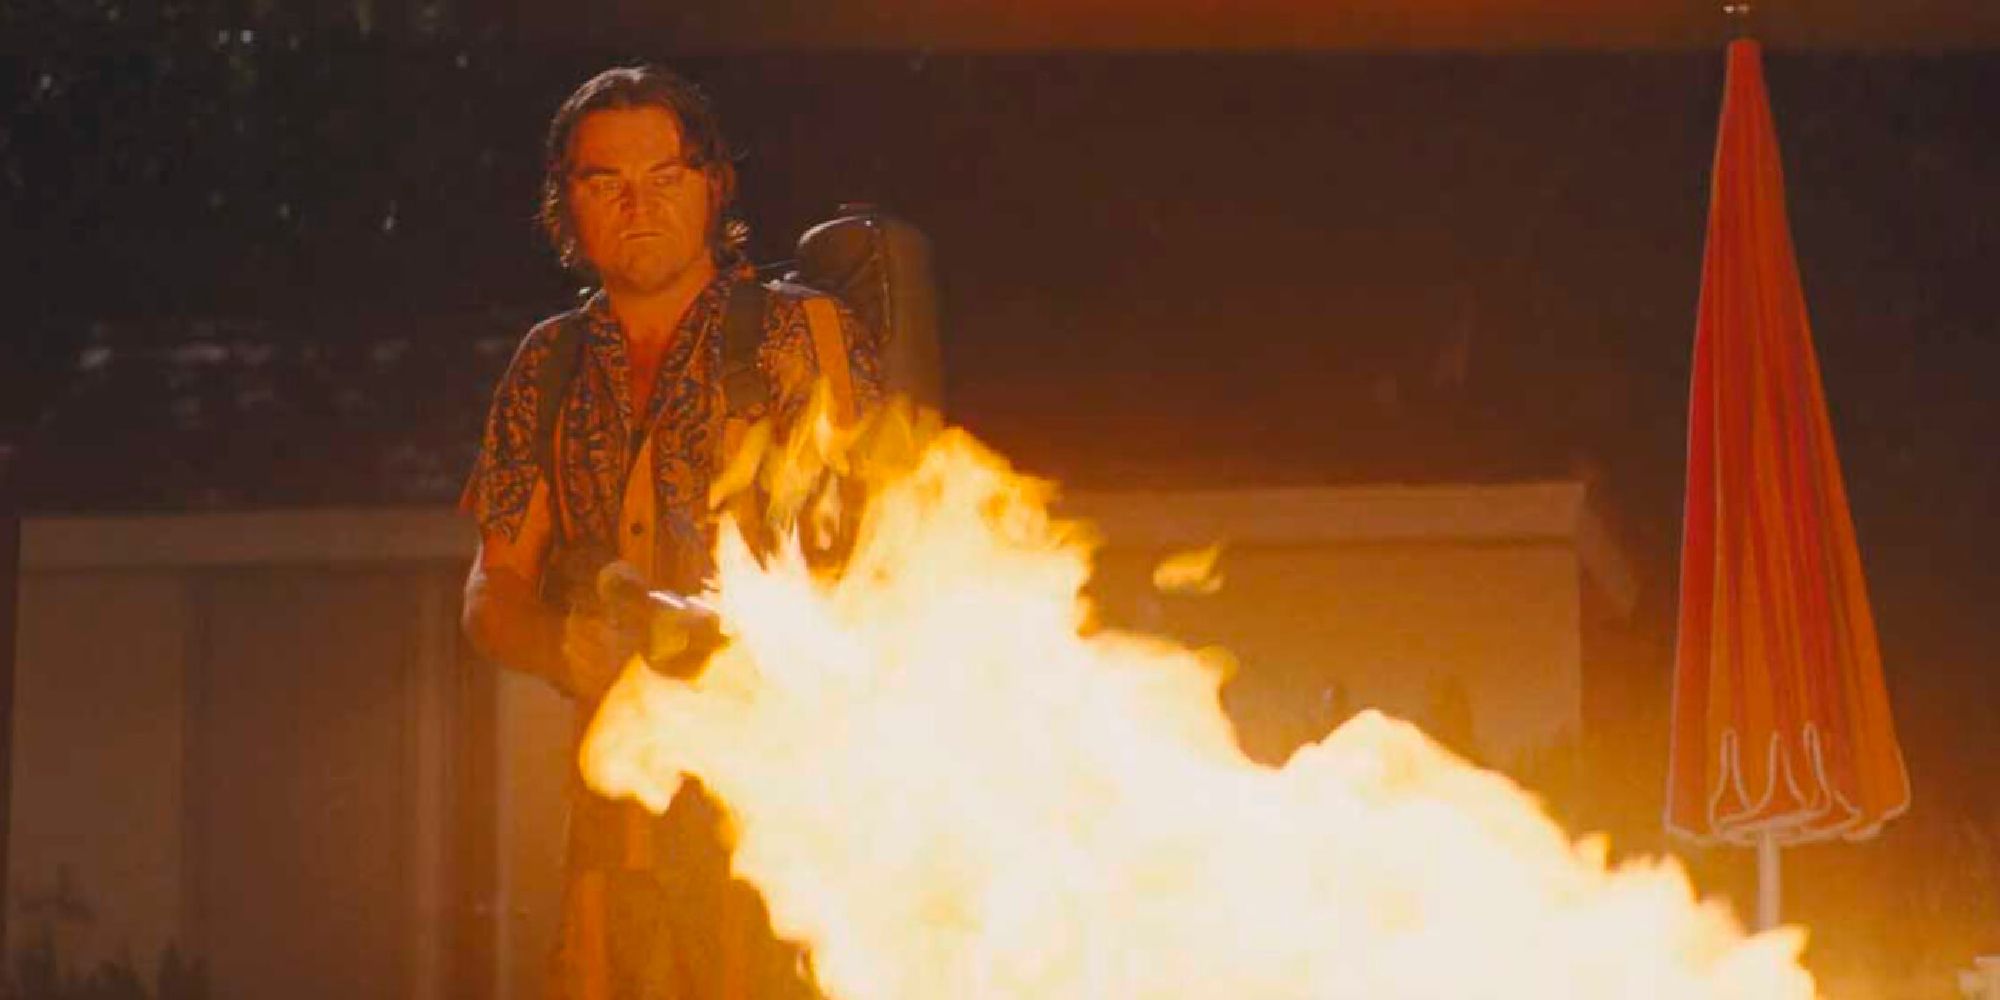 Leonardo DiCaprio using a flamethrower in Once Upon a Time in Hollywood